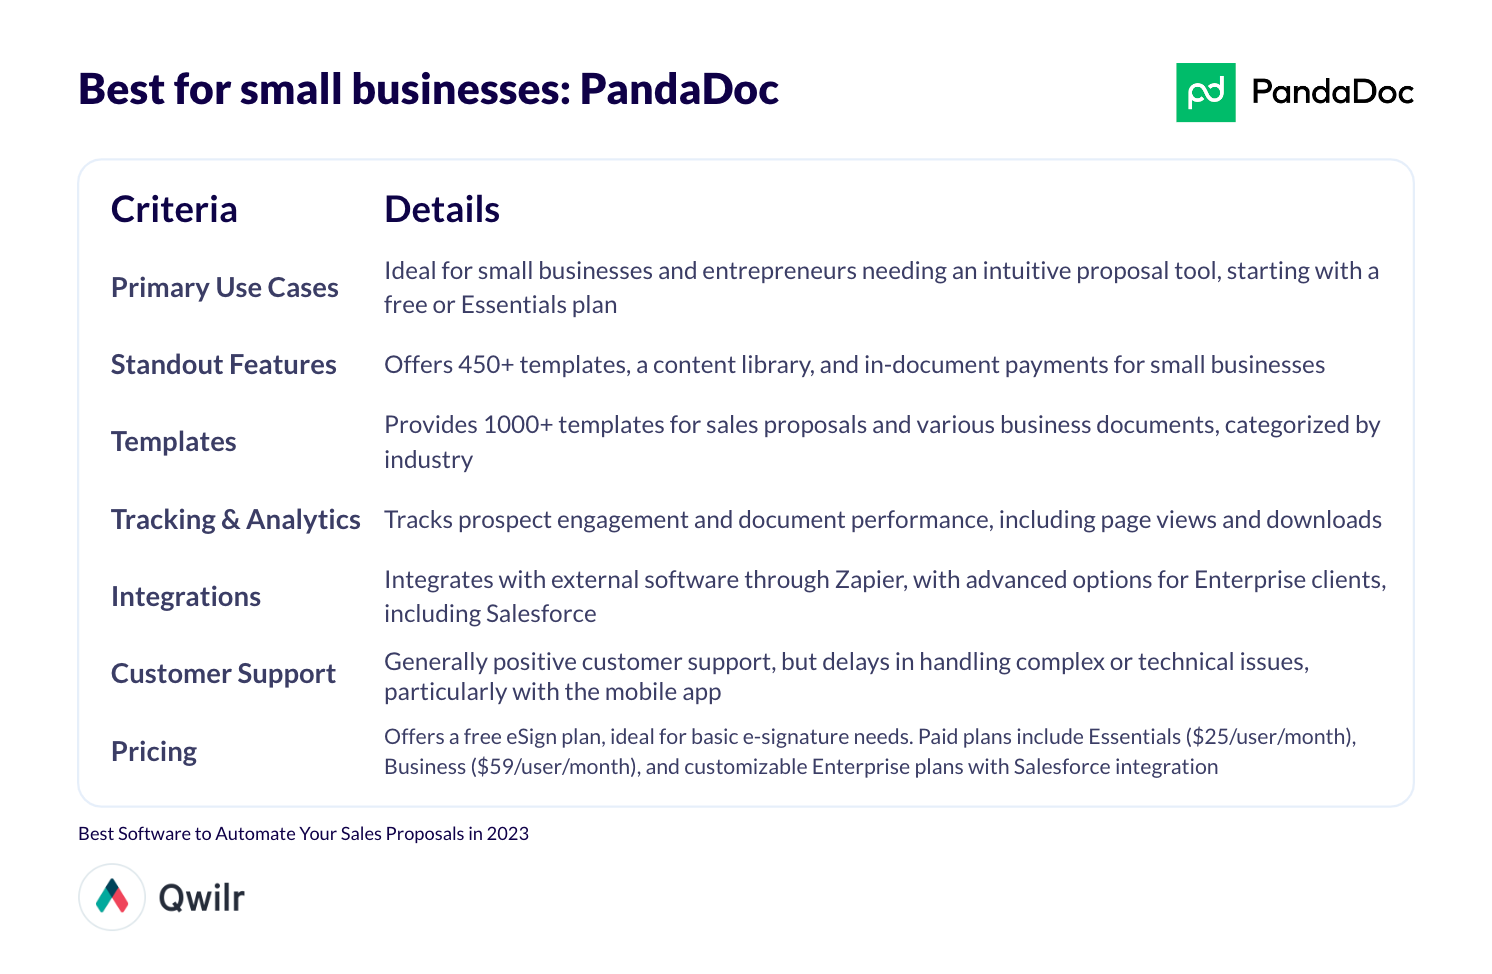 Table summary of Best for small business: PandaDoc